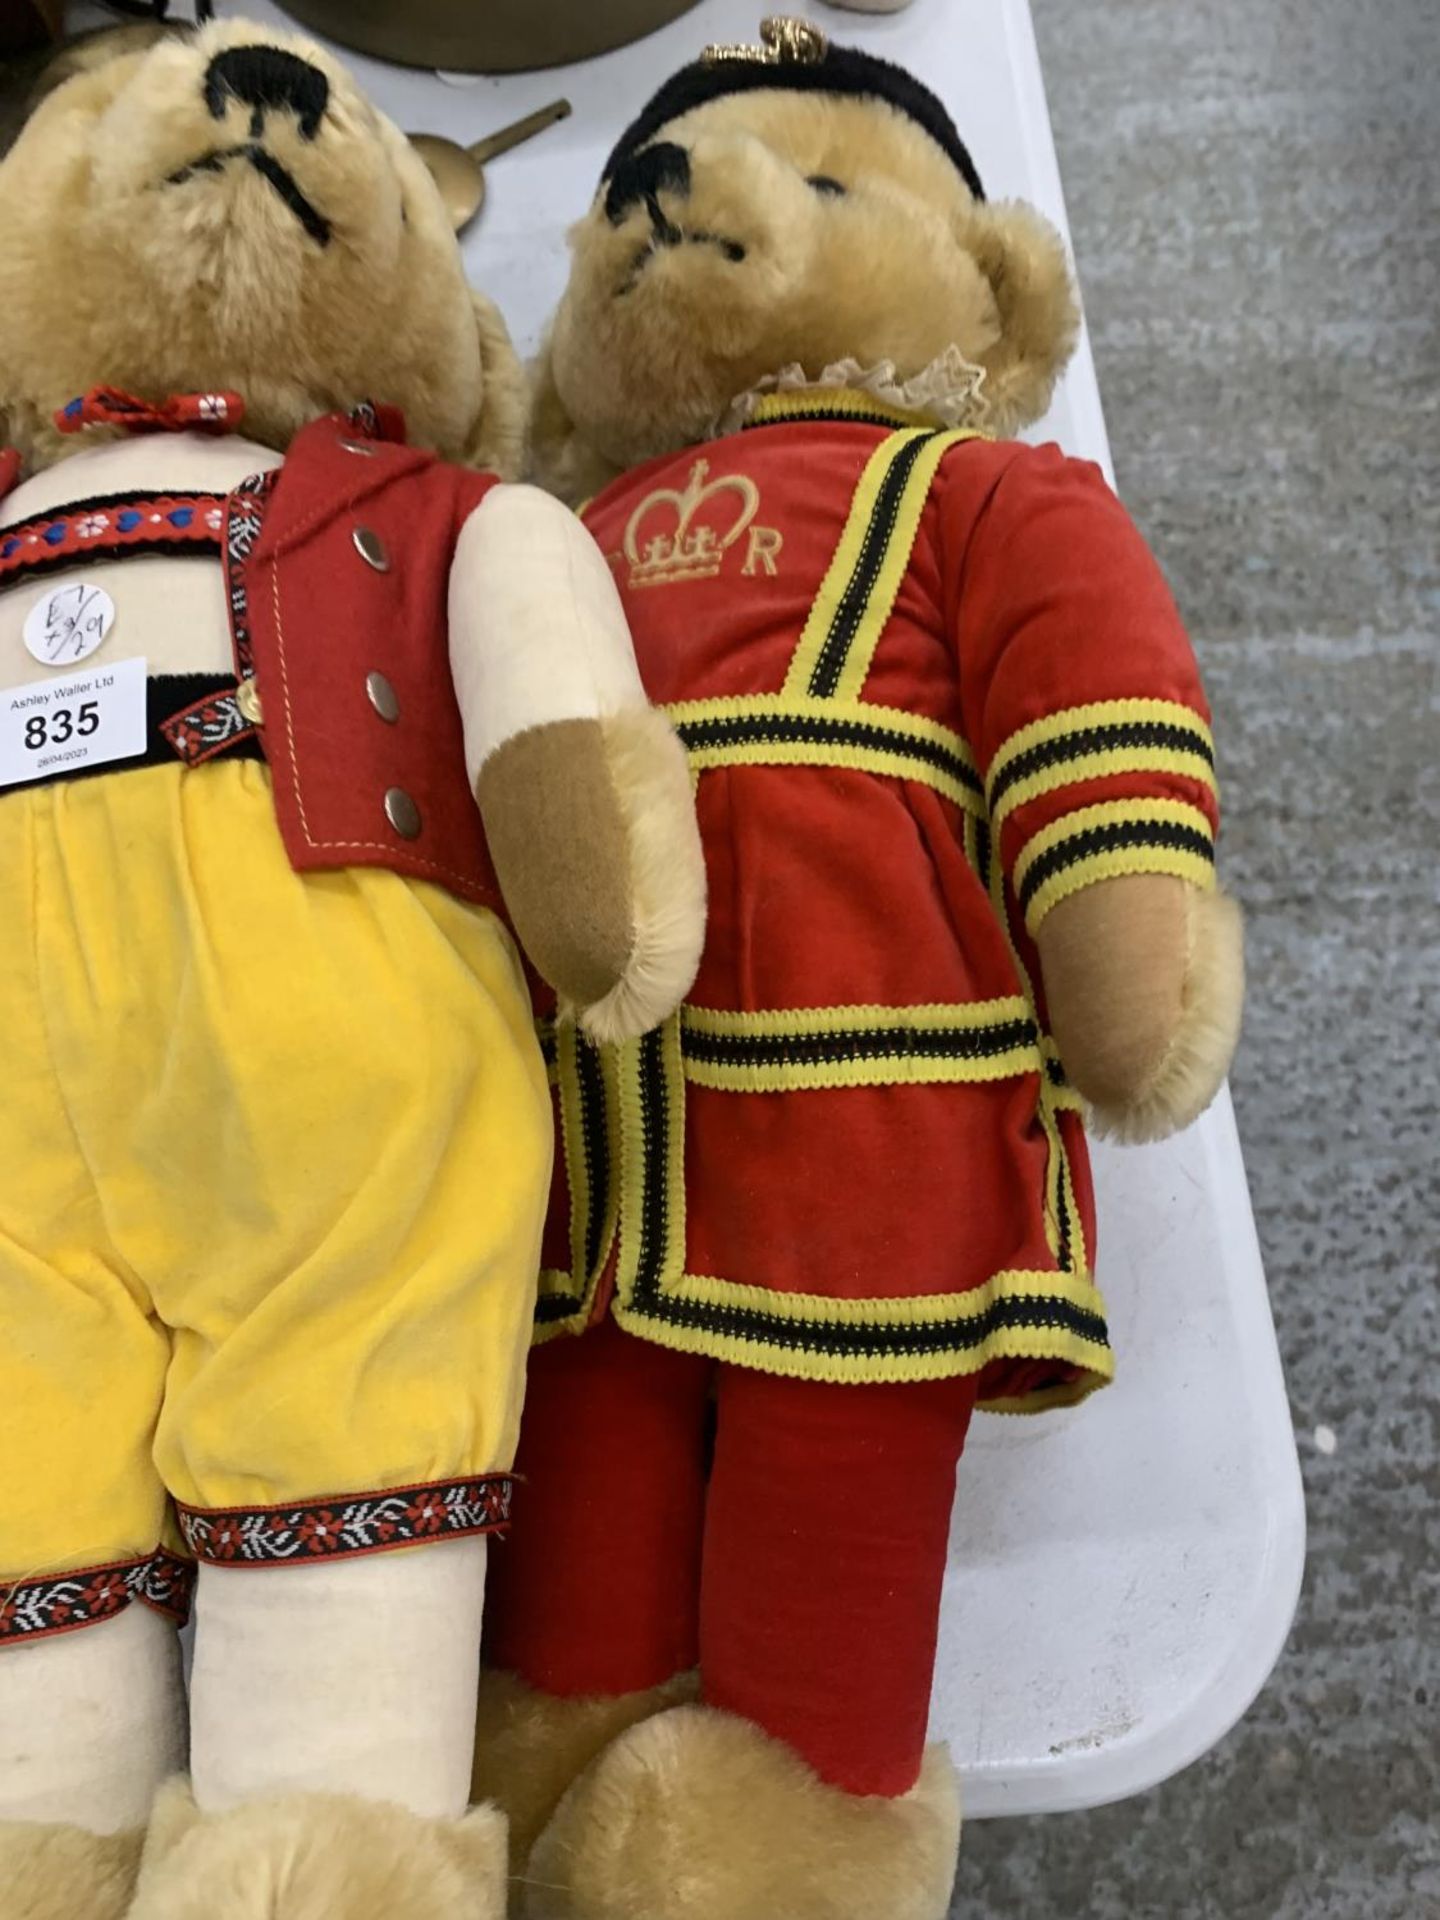 THREE VINTAGE MERRYTHOUGHT TEDDY BEARS, TWO IN ROYAL REGALIA, ALL WITH THE MERRYTHOUGHT LABEL - Image 4 of 4